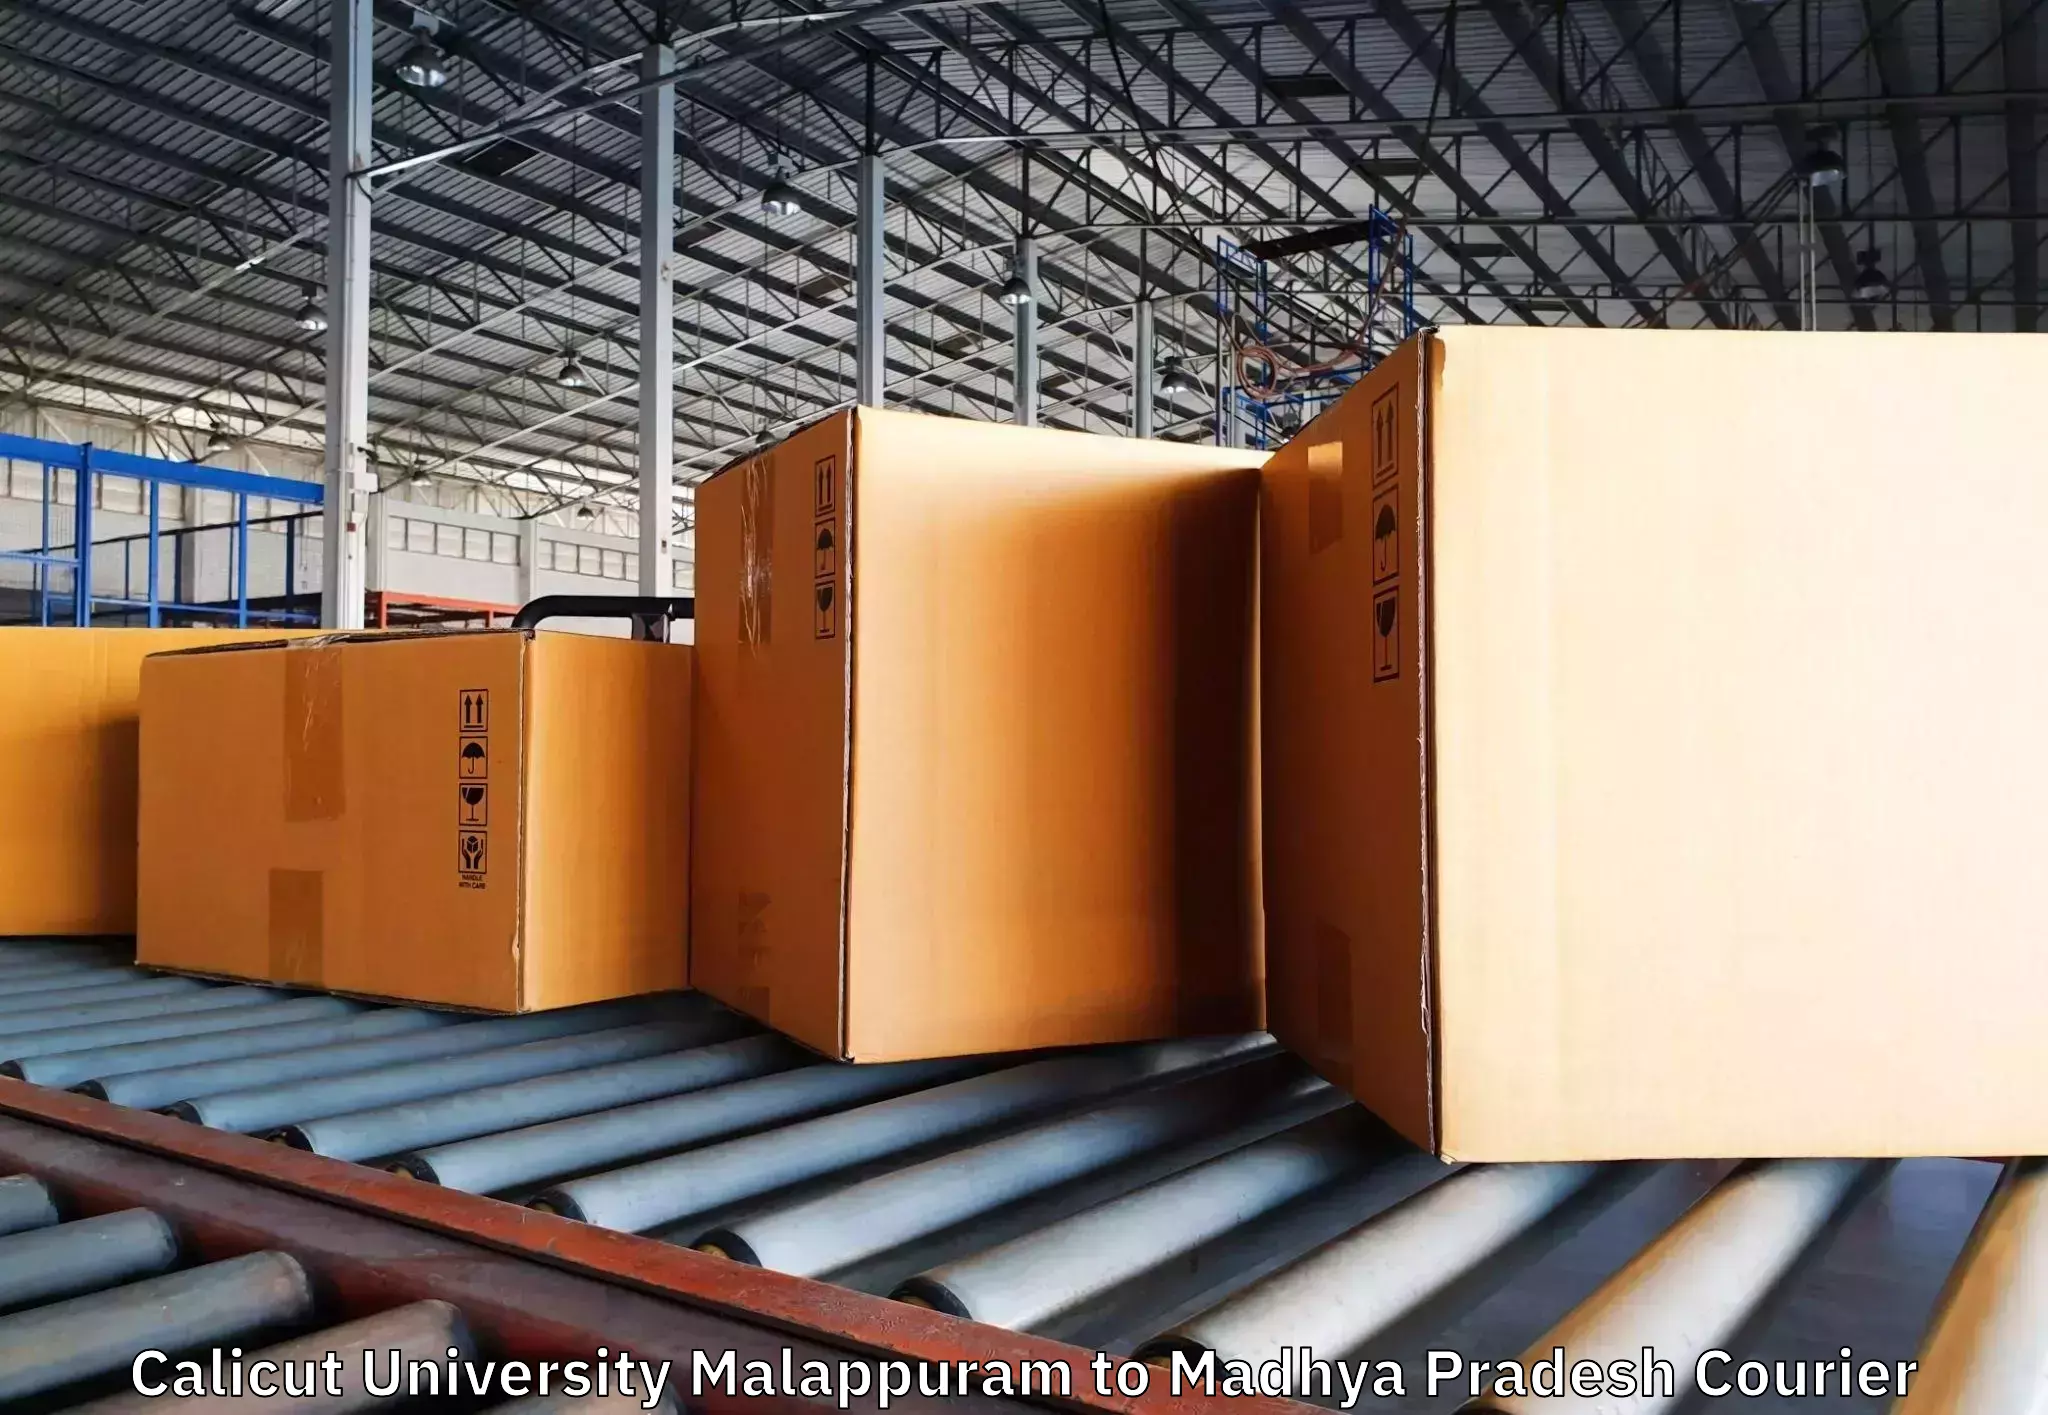 Professional movers and packers in Calicut University Malappuram to Polay Kalan